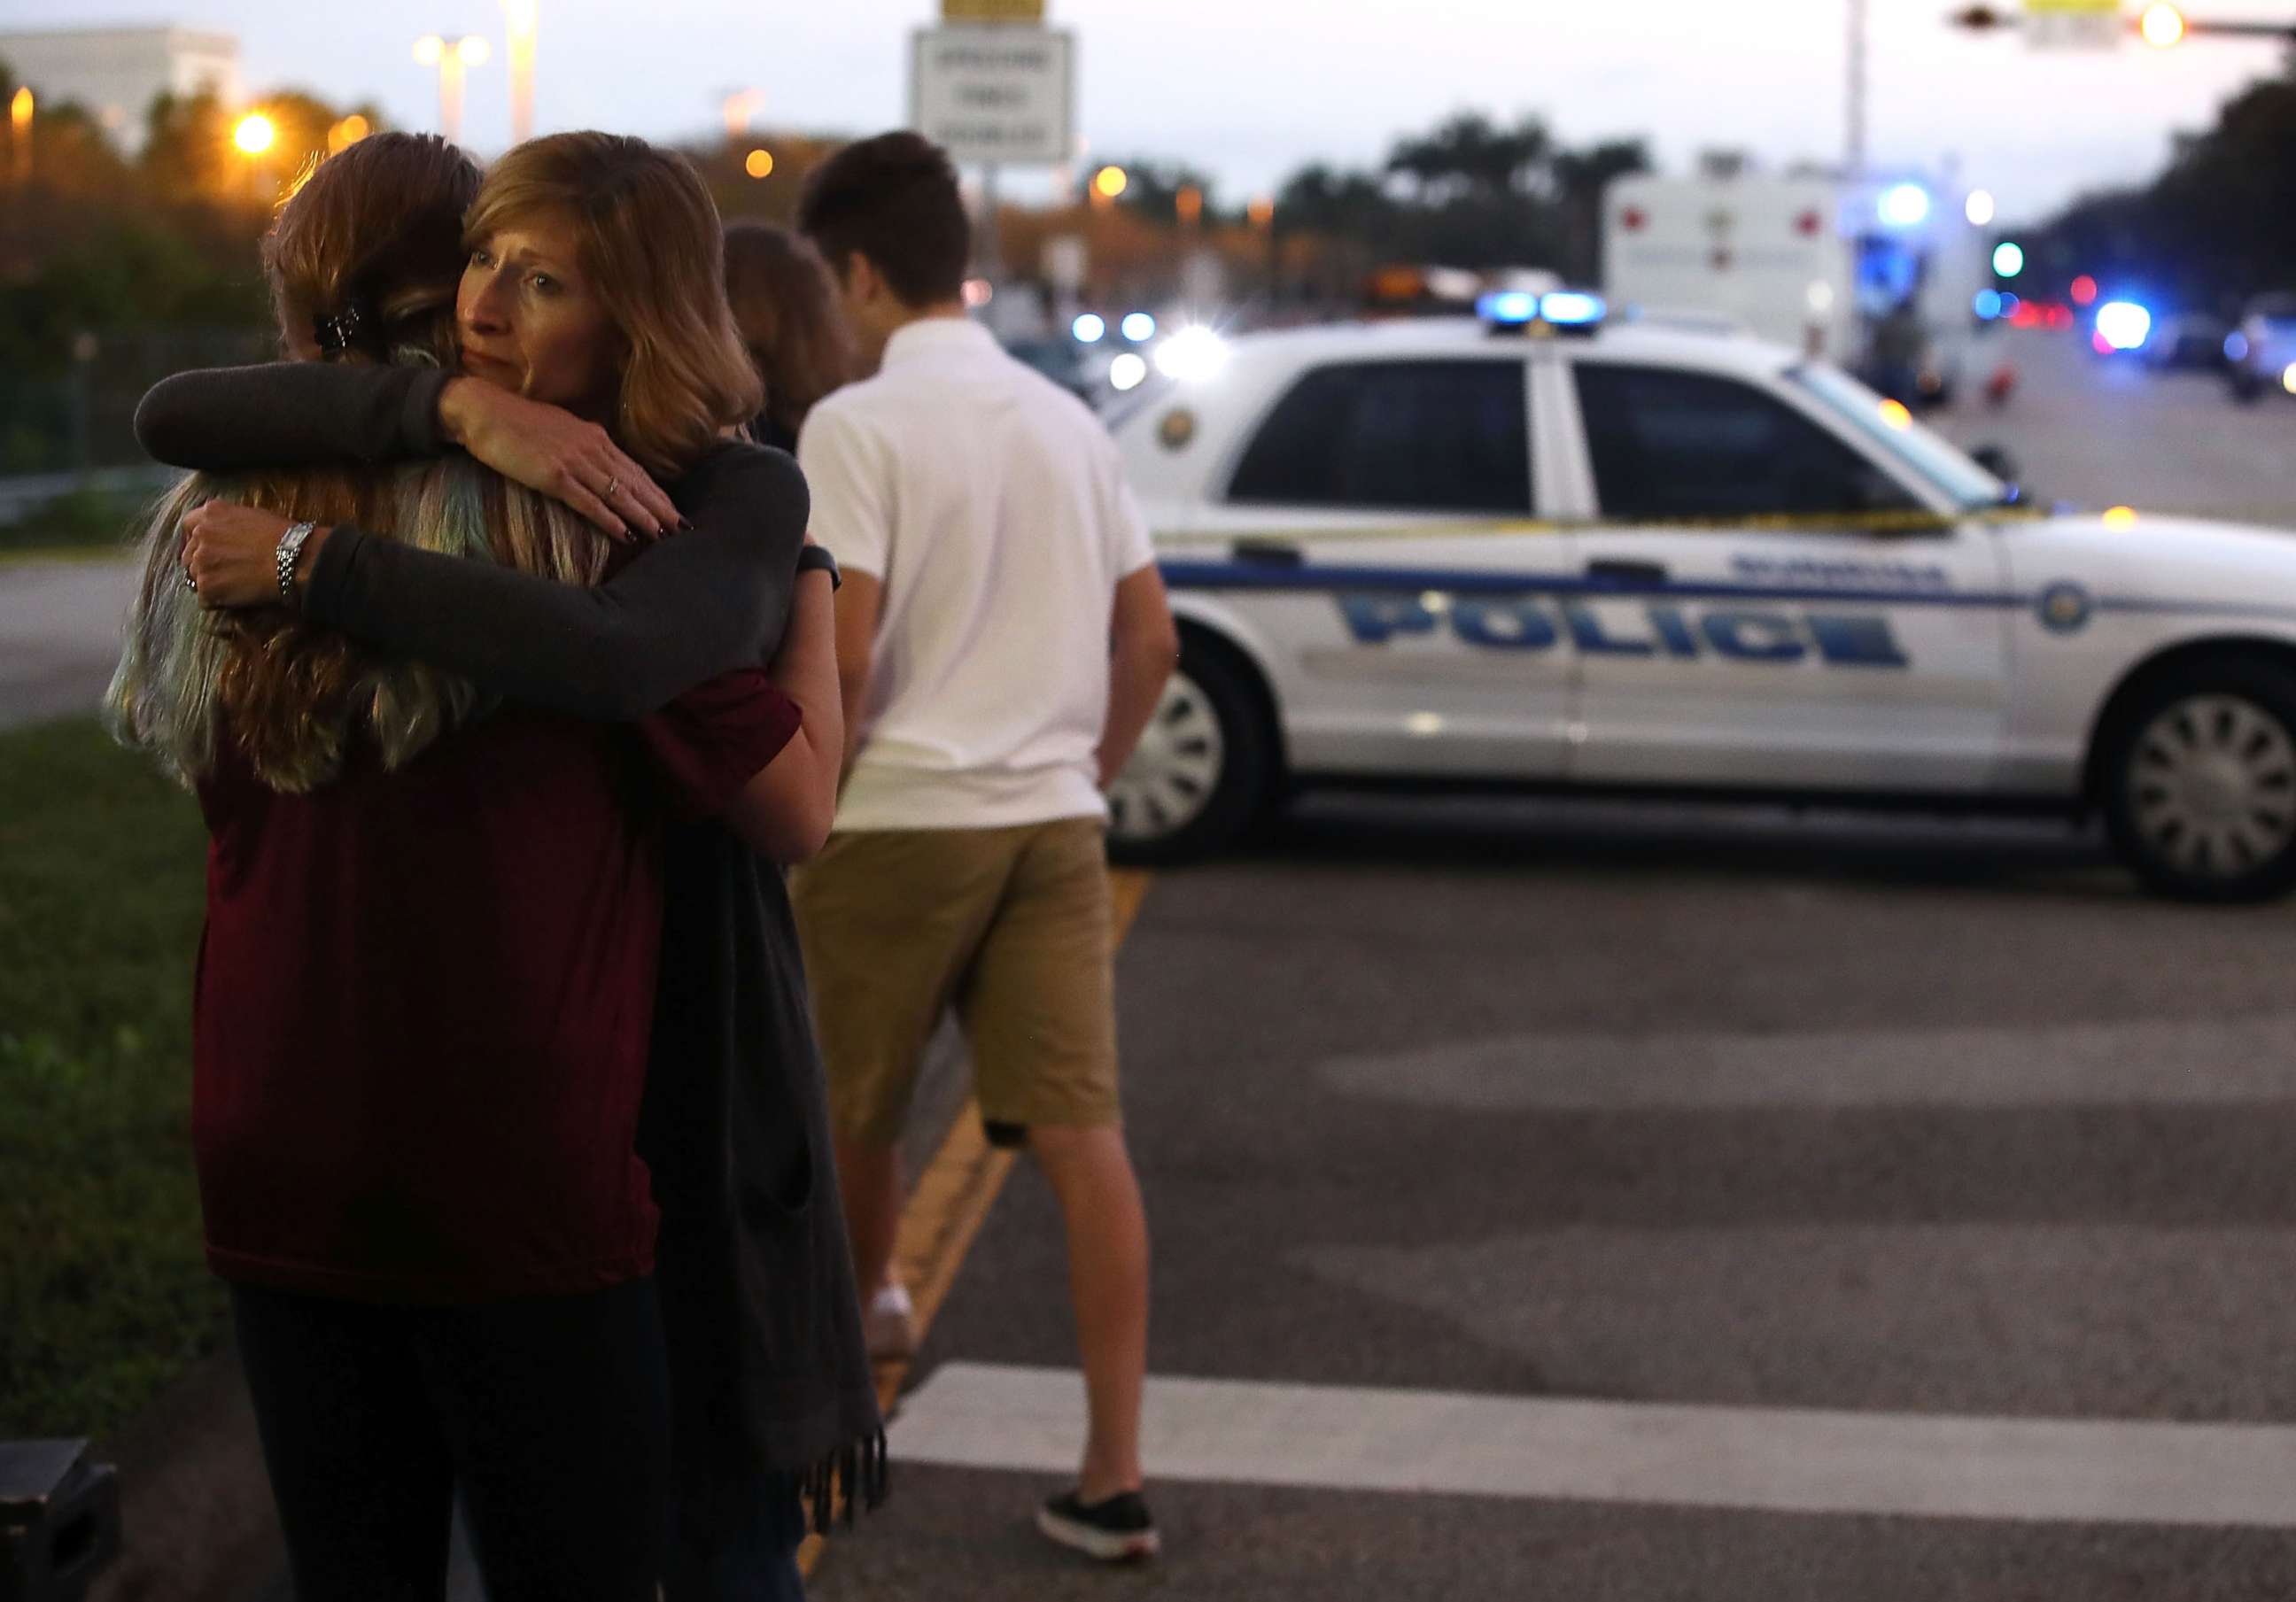 PHOTO: Kristi Gilroy hugs a young woman at a police check point on Feb. 15, 2018, near the Marjory Stoneman Douglas High School in Parkland, Fla., where 17 people were killed by a gunman 